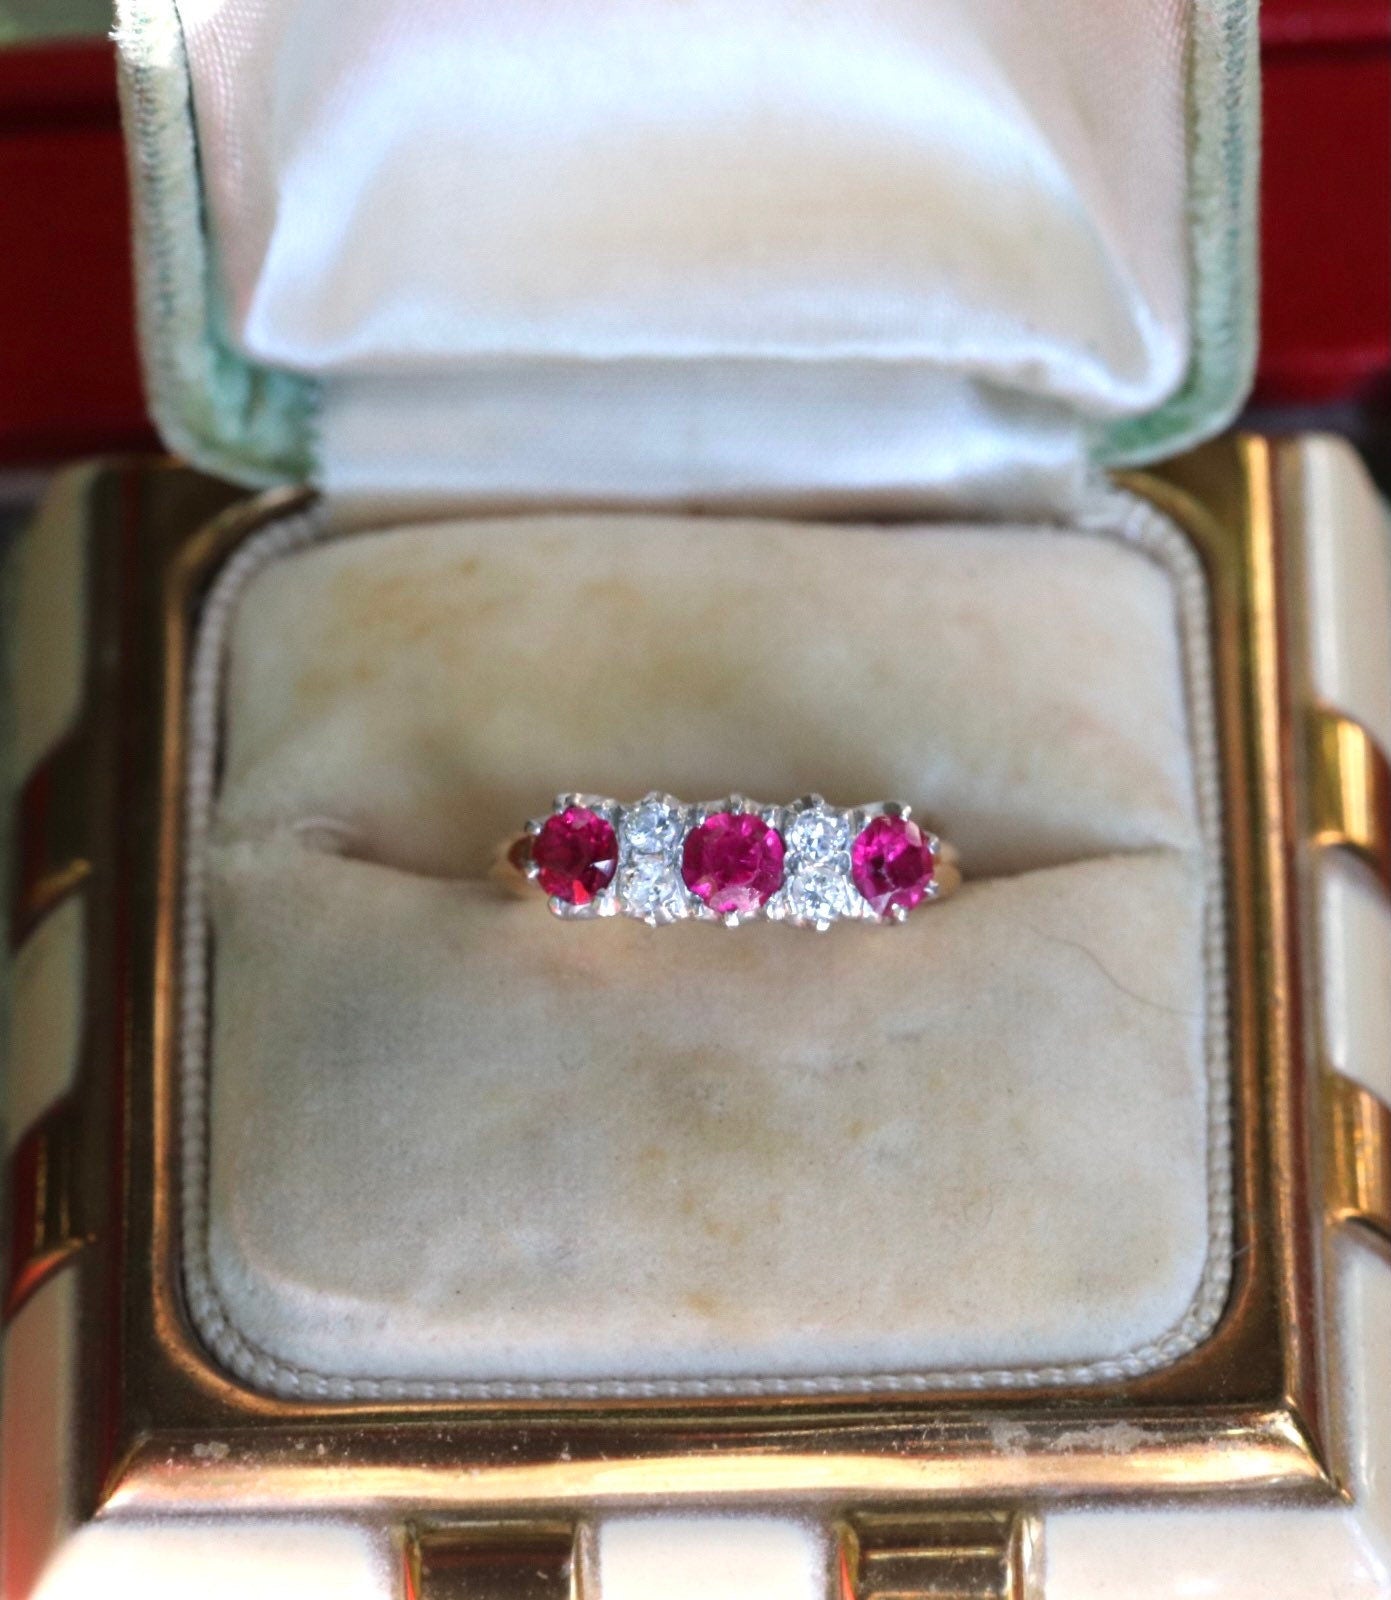 Ruby (synthetic) and old cut diamond ring size 4.5 (sizable) set in 14k yellow and white gold